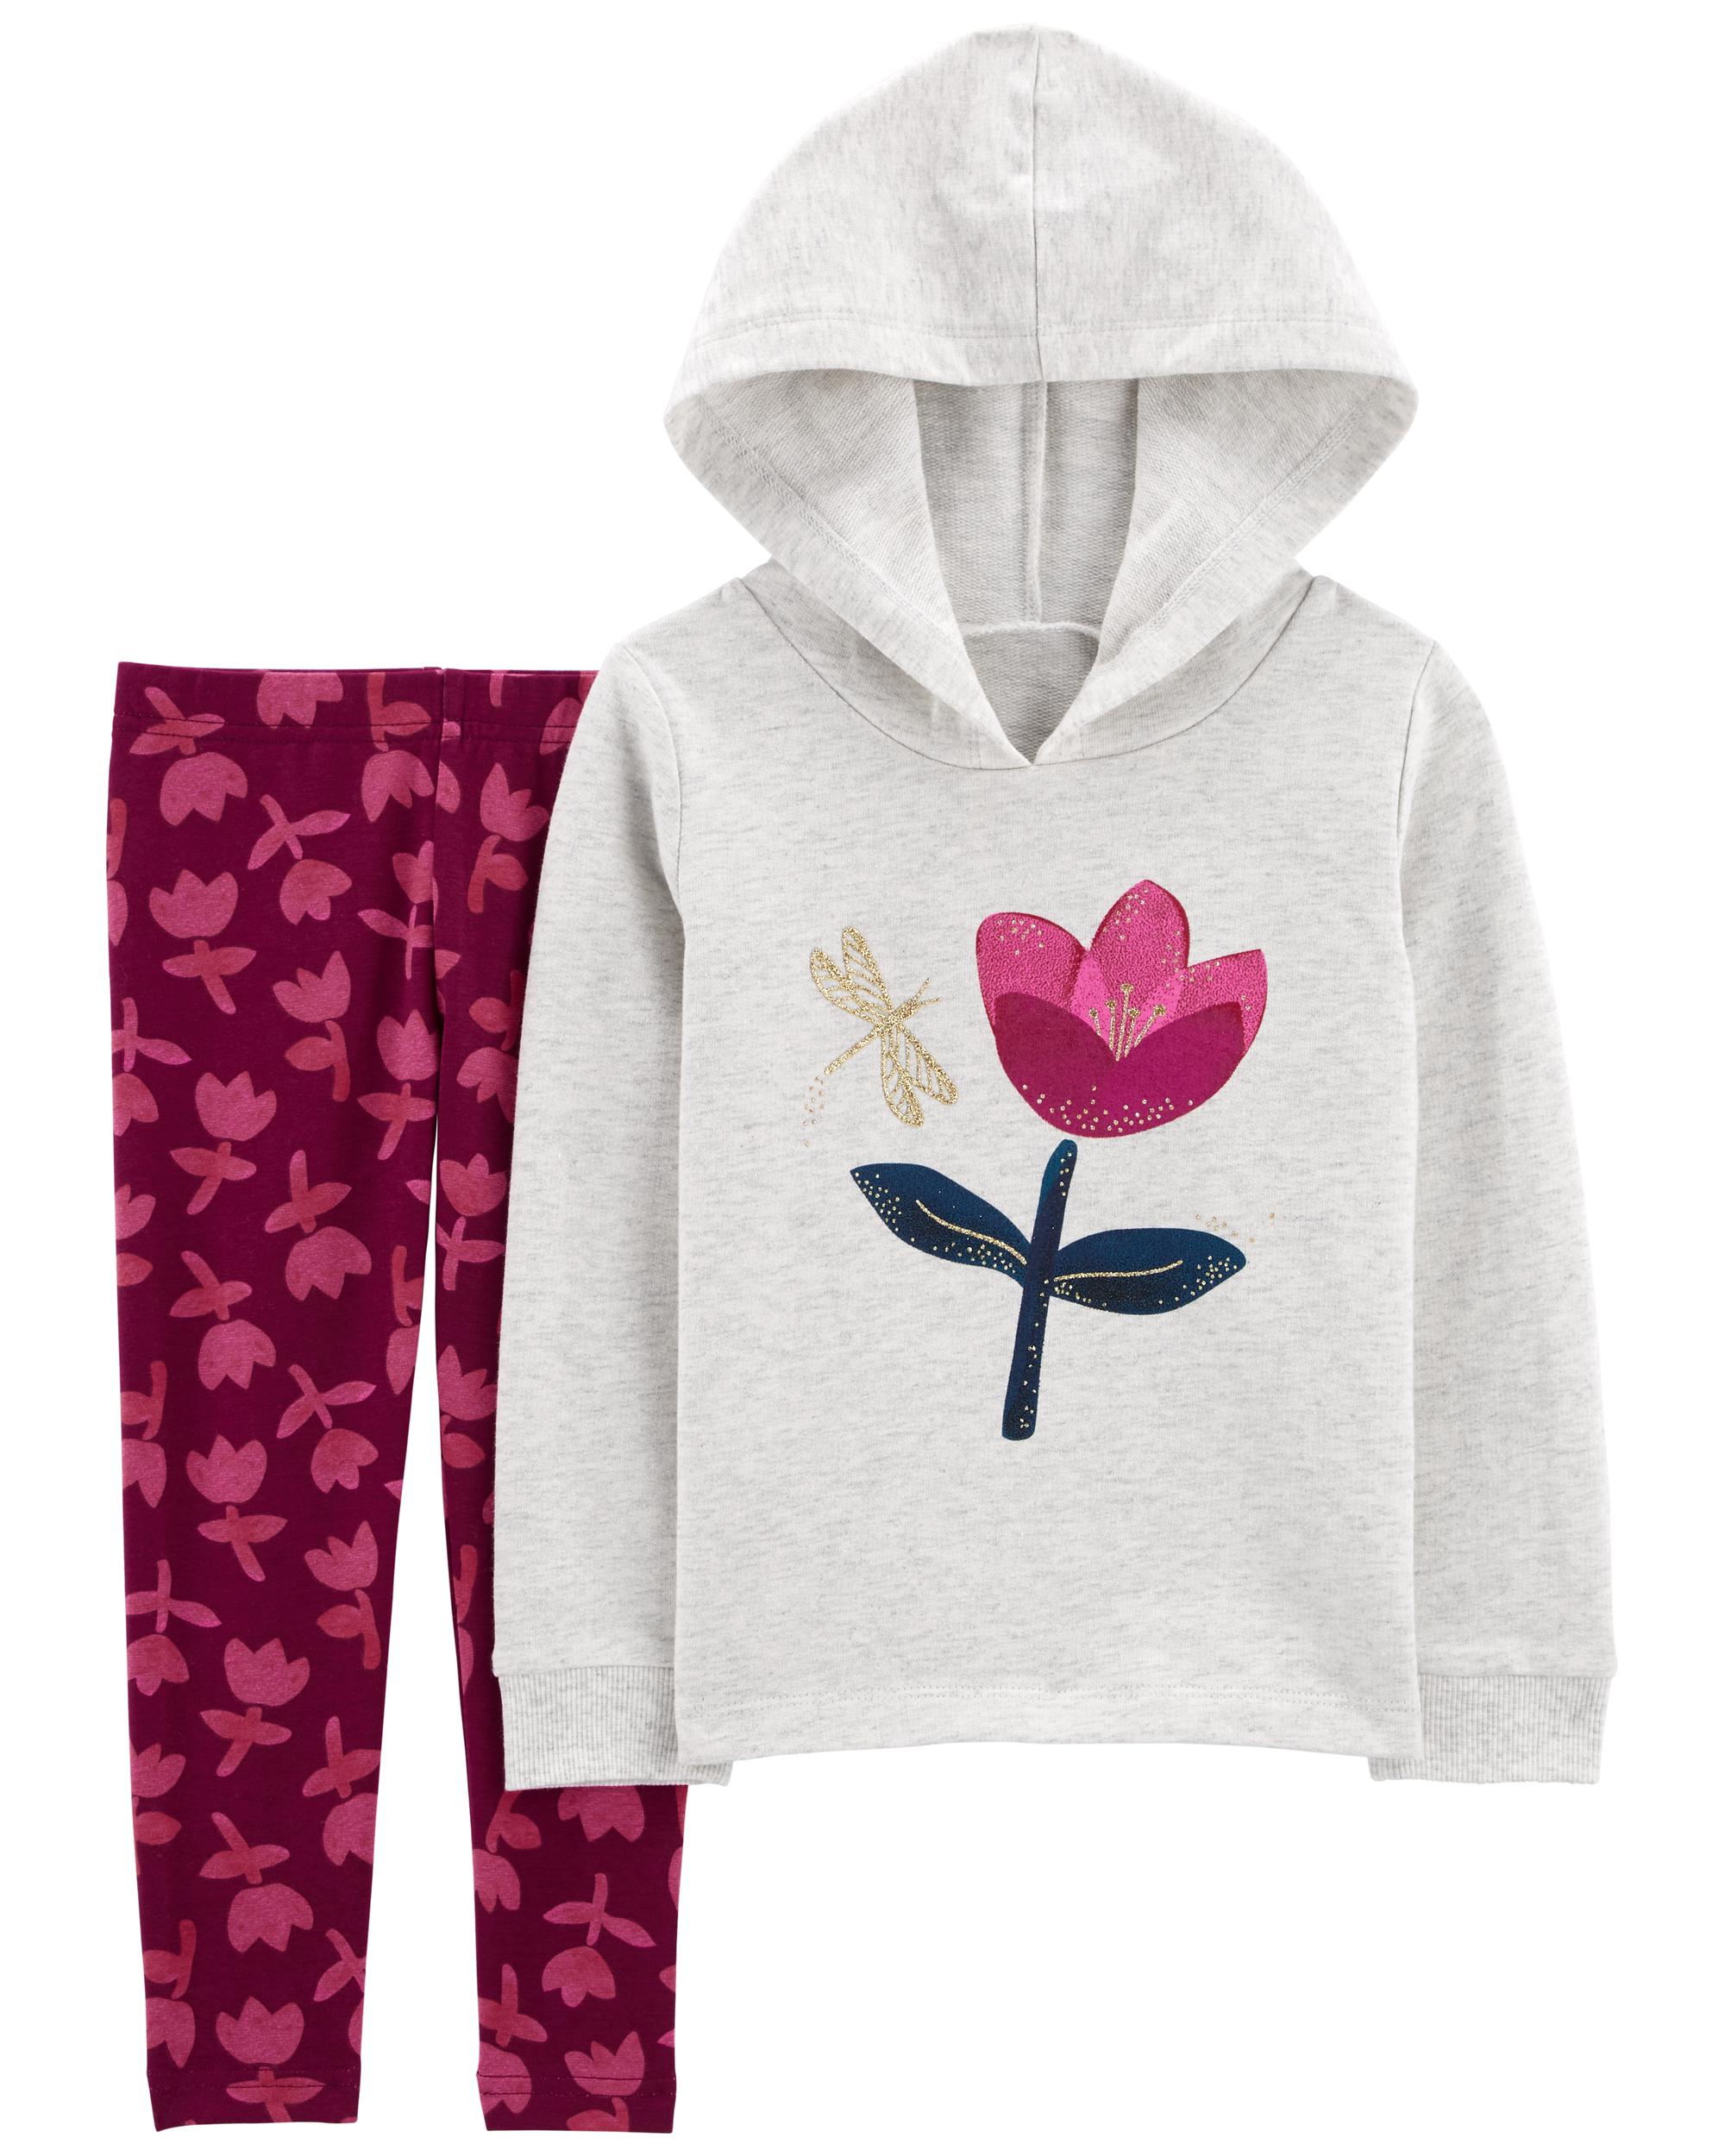 Buy XY Life Playmate T-shirts & Leggings Combo For Girls (Set of 2) online